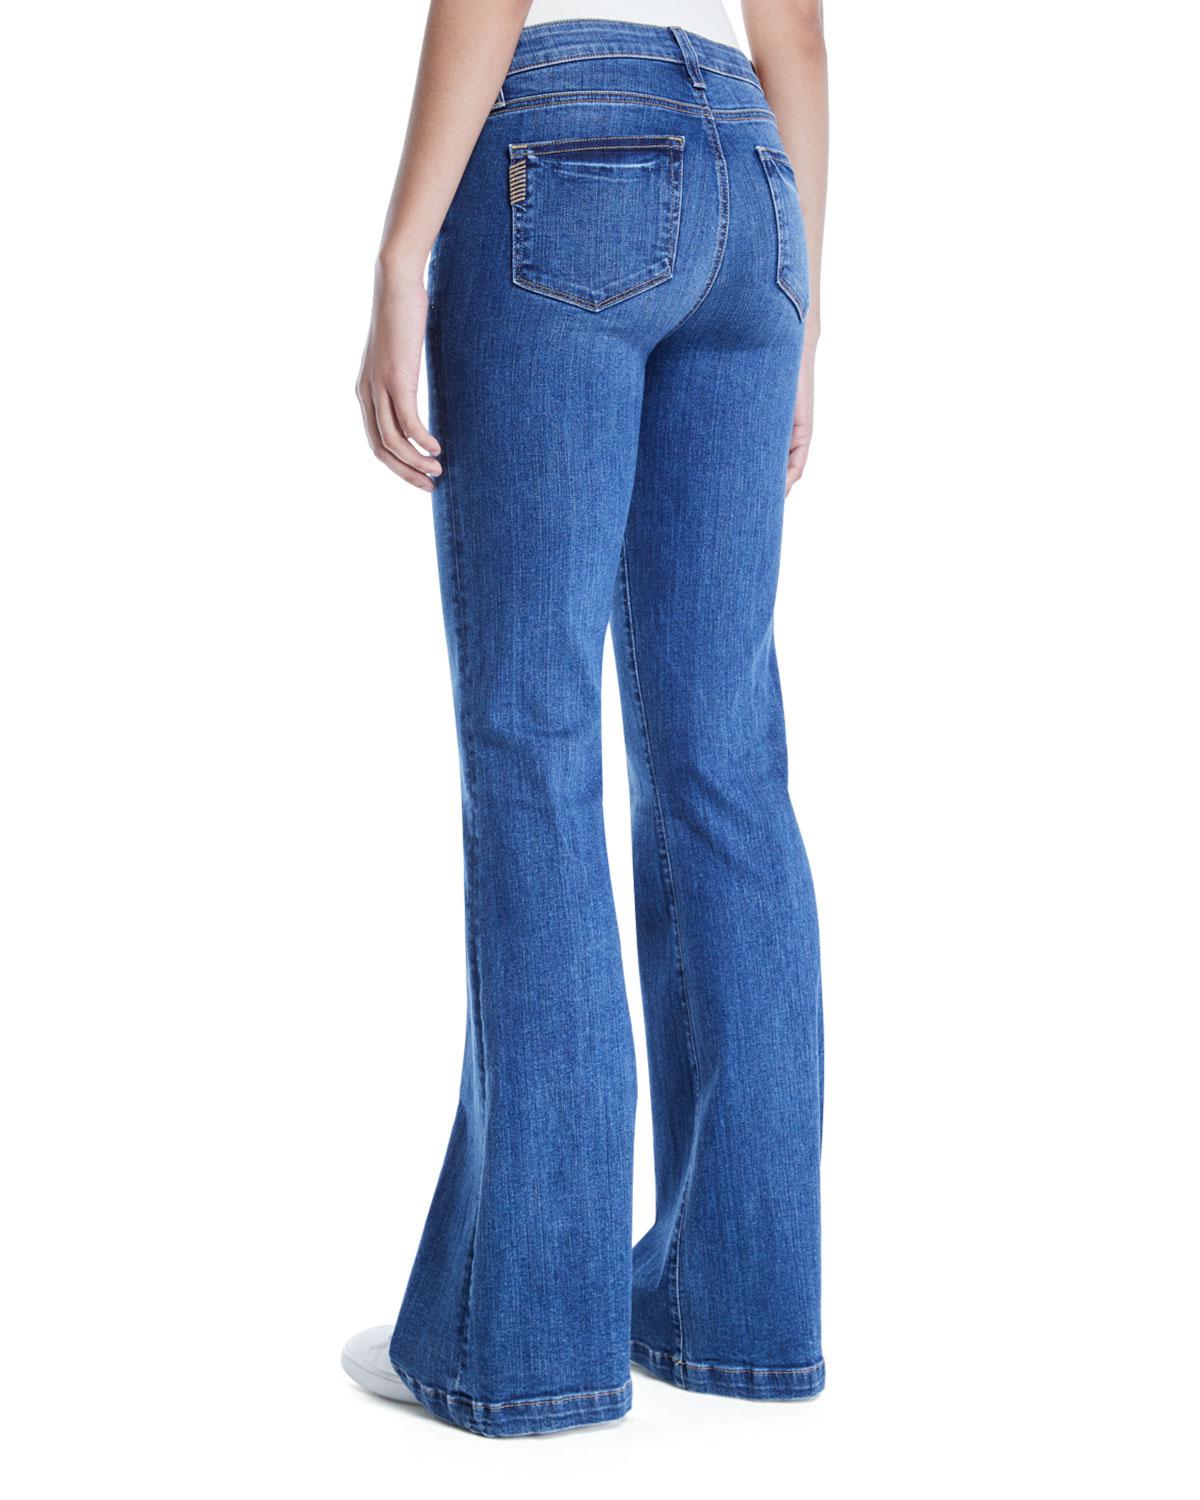 Lyst - Paige Genevieve Flare-leg Jeans With Button Fly in Blue